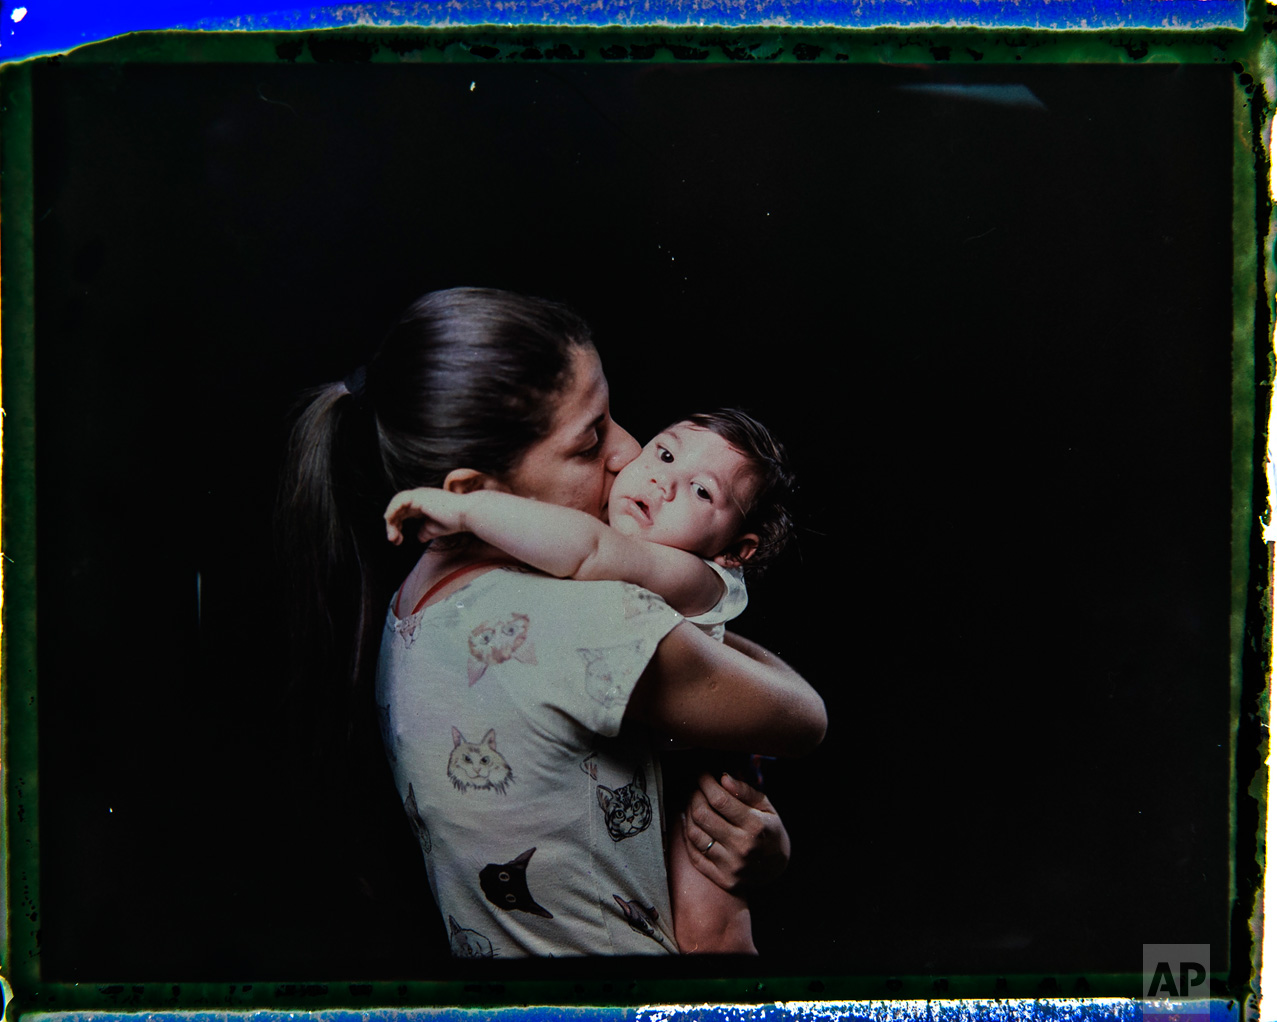  In this Sept. 26, 2016 photo made from a negative recovered from instant film, Angelica Pereira kisses her daughter Luiza, who was born with microcephaly, one of many serious medical problems that can be caused by congenital Zika syndrome, during a 